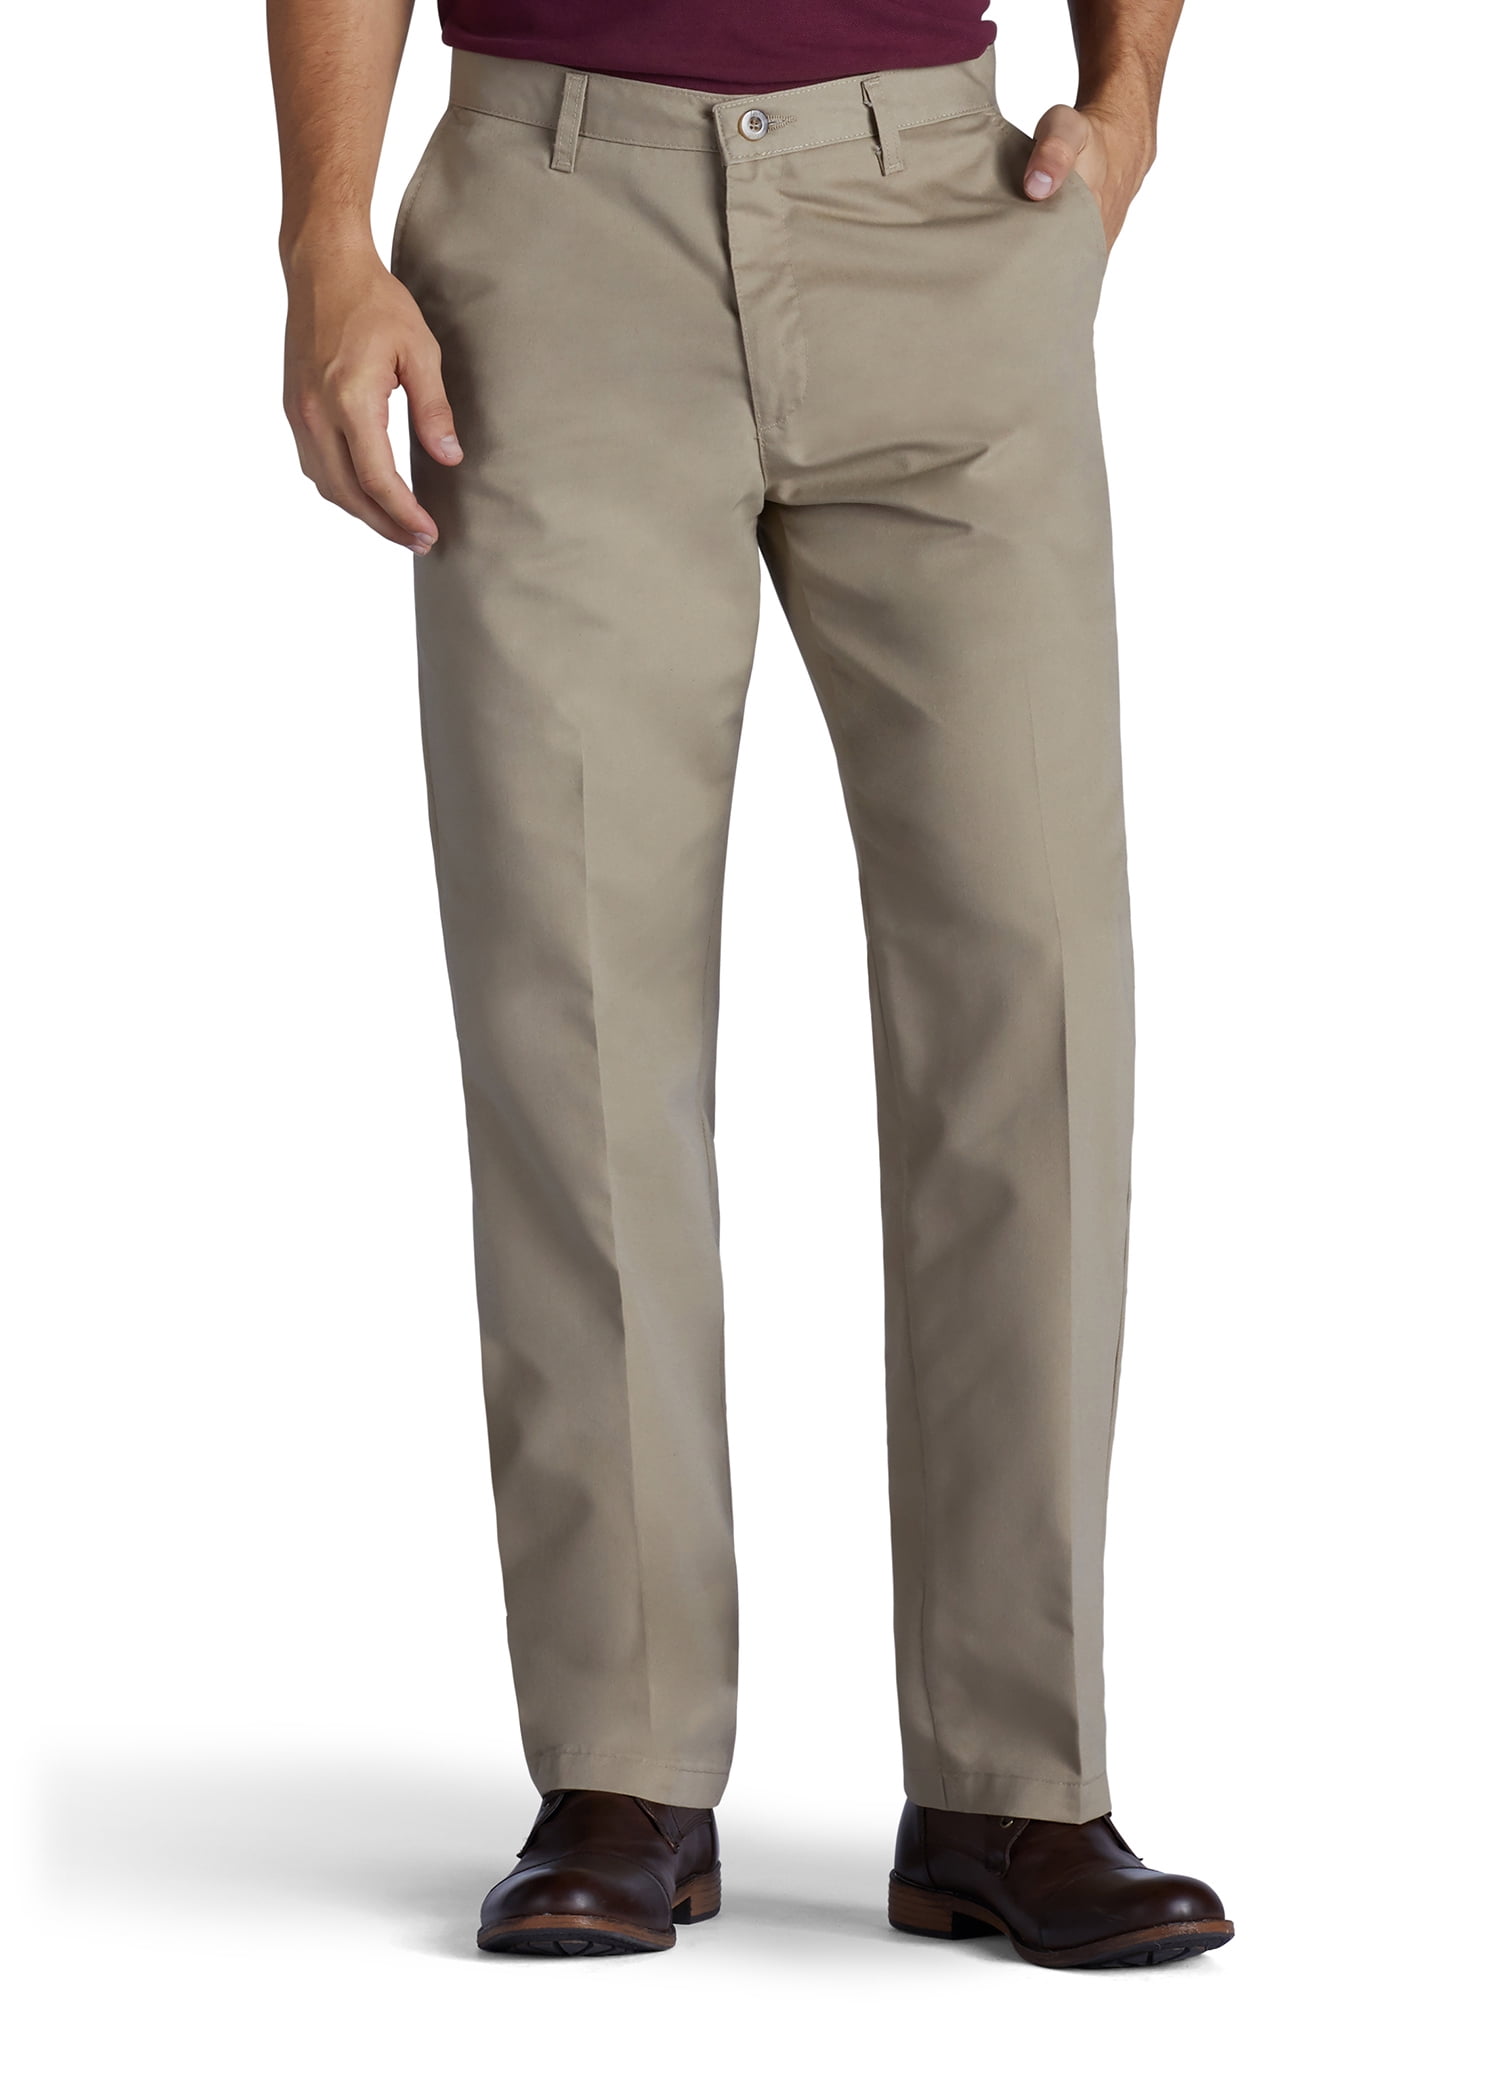 LEE Men's Total Freedom Stretch Relaxed Fit Flat Front Pant 